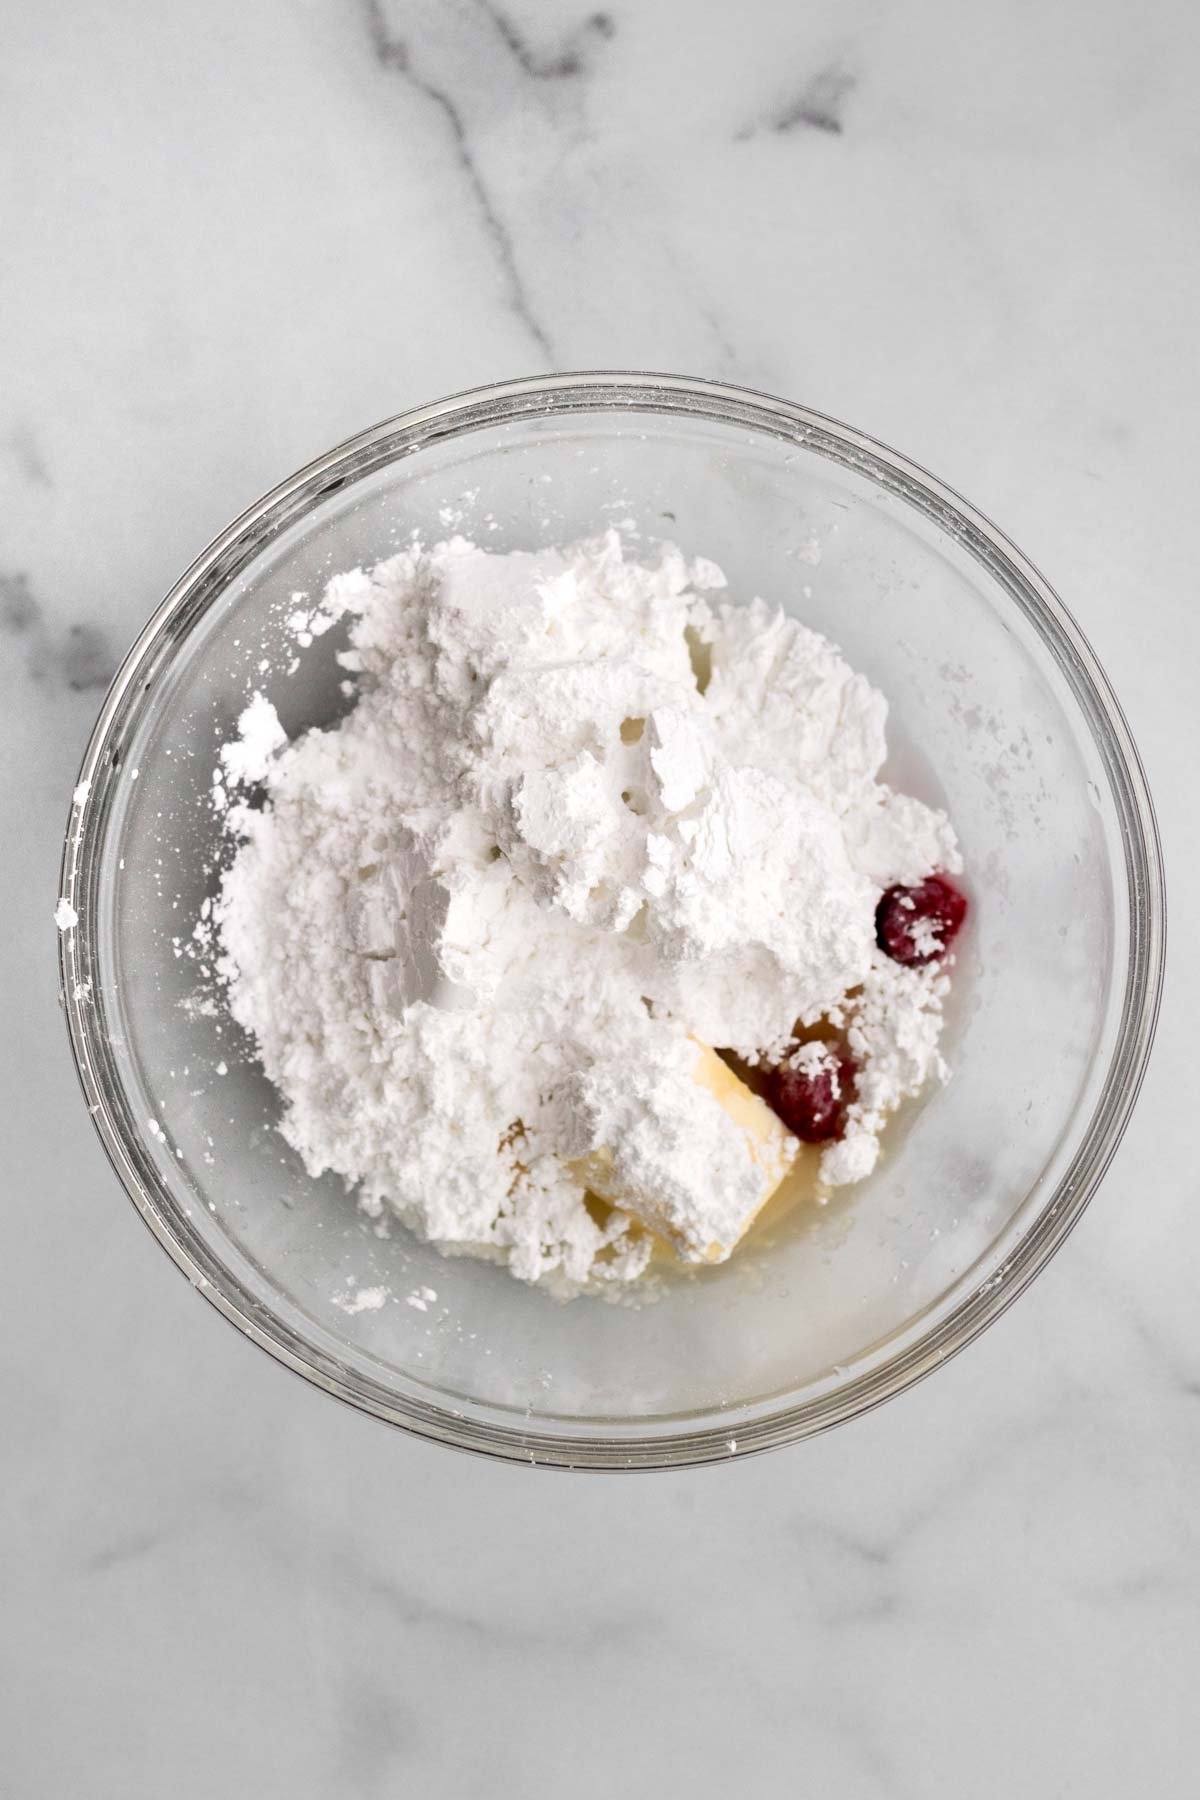 Sugar, water and confectioners' sugar in a bowl.